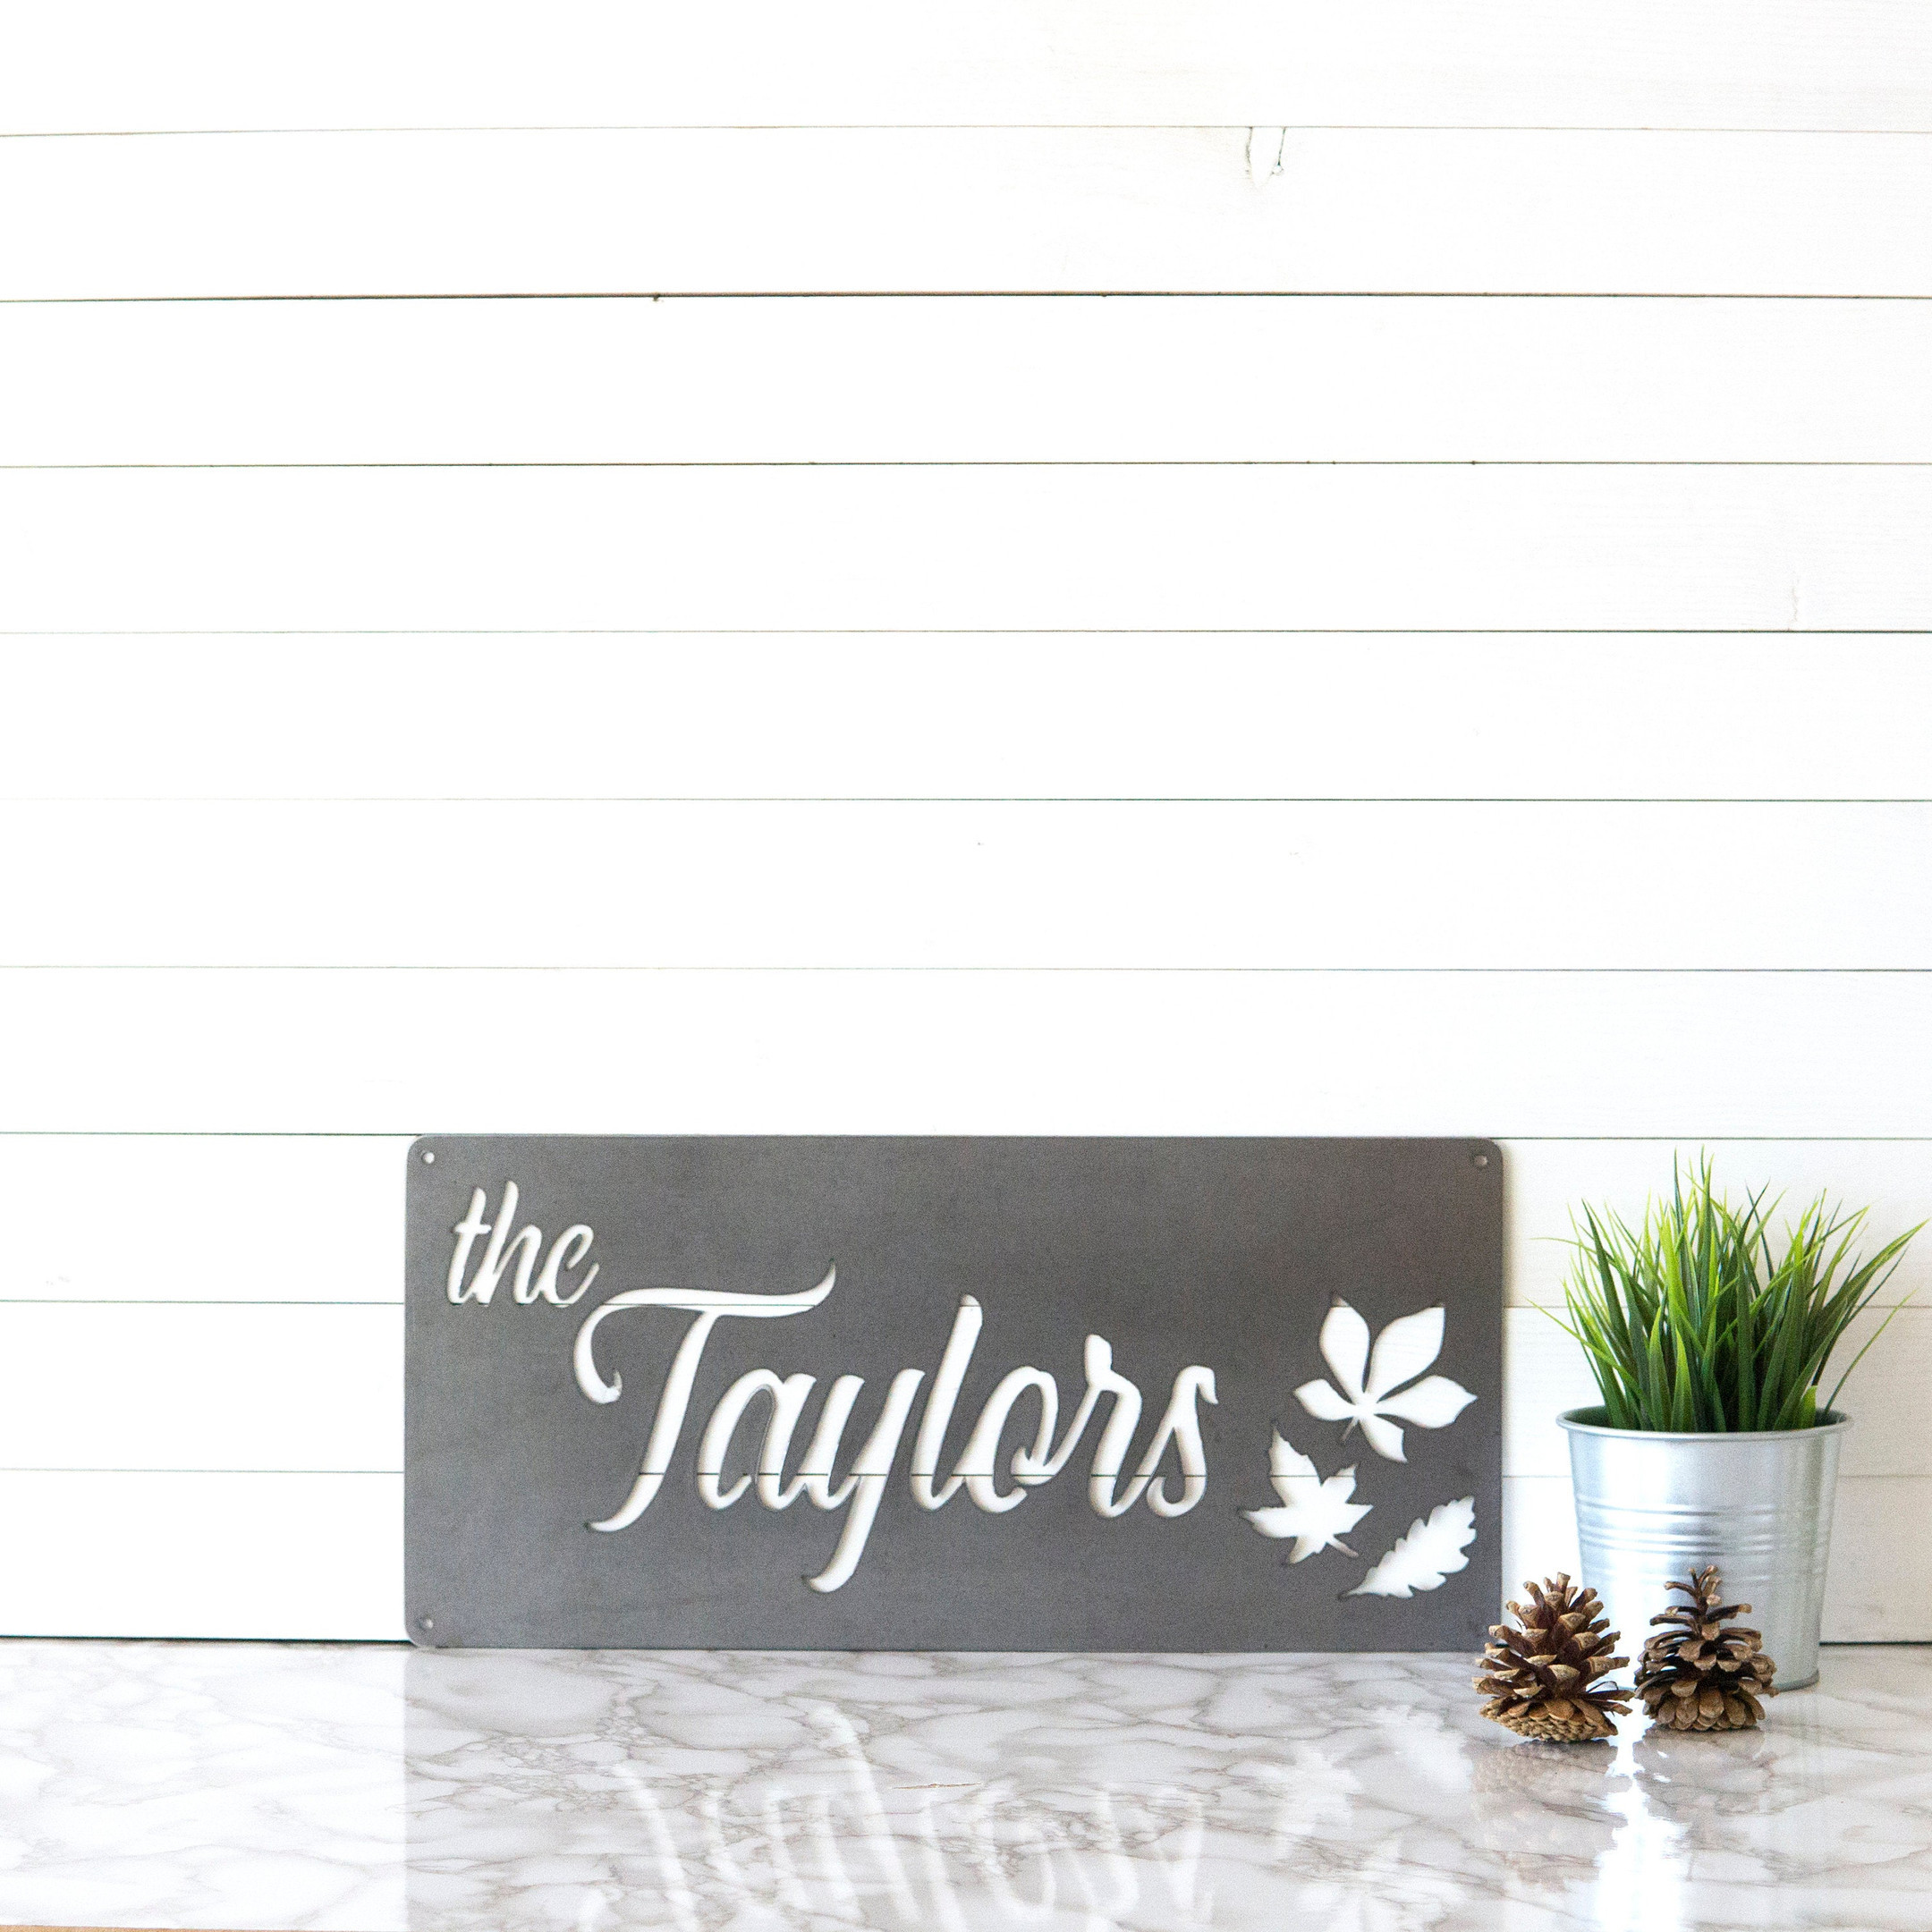 Personalized Family Name Sign, Metal Last Name Sign, Metal Family Name Sign, Wall Decor, Wedding Gift, Anniversary Gift, Gifts For Her, Laser Cut Metal Signs Custom Gift Ideas 14x14IN